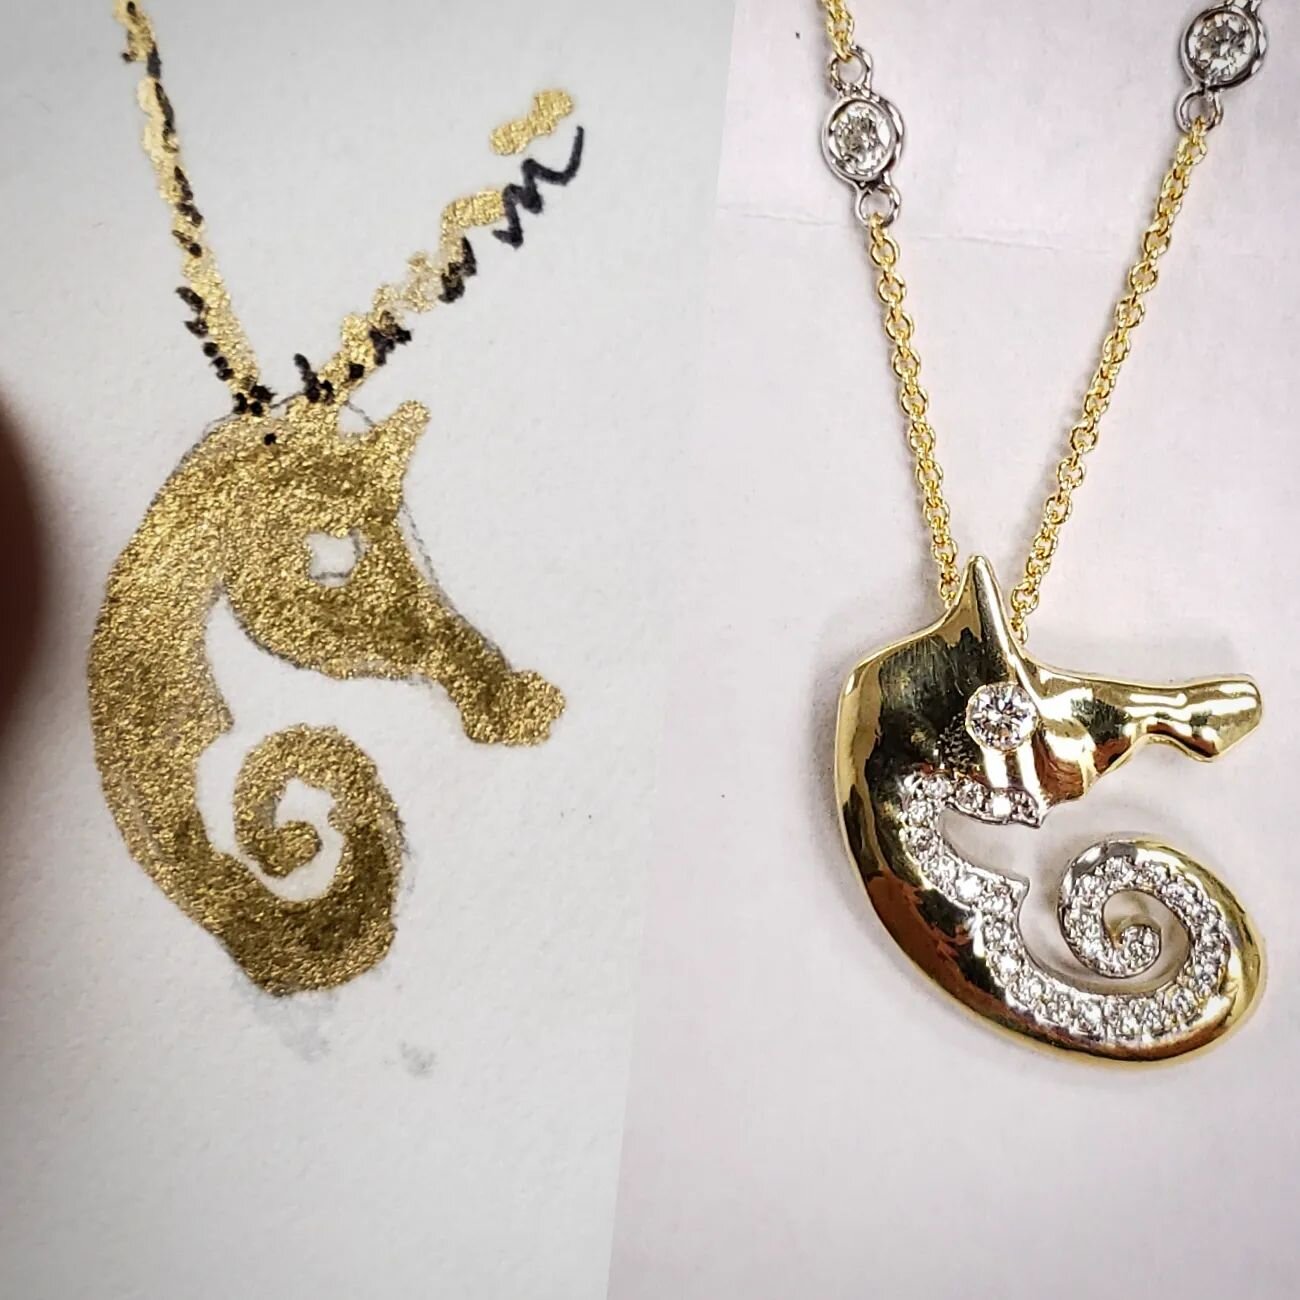 A Philip Ratner original sketch made into an everyday pendant with a diamond &quot;E&quot; pattetn in the belly and diamond in the eye of the seahorse. 

#lynnjewelers #diamond #diamonds #diamondpendant #pendant #necklace #custommade #customdesign #h